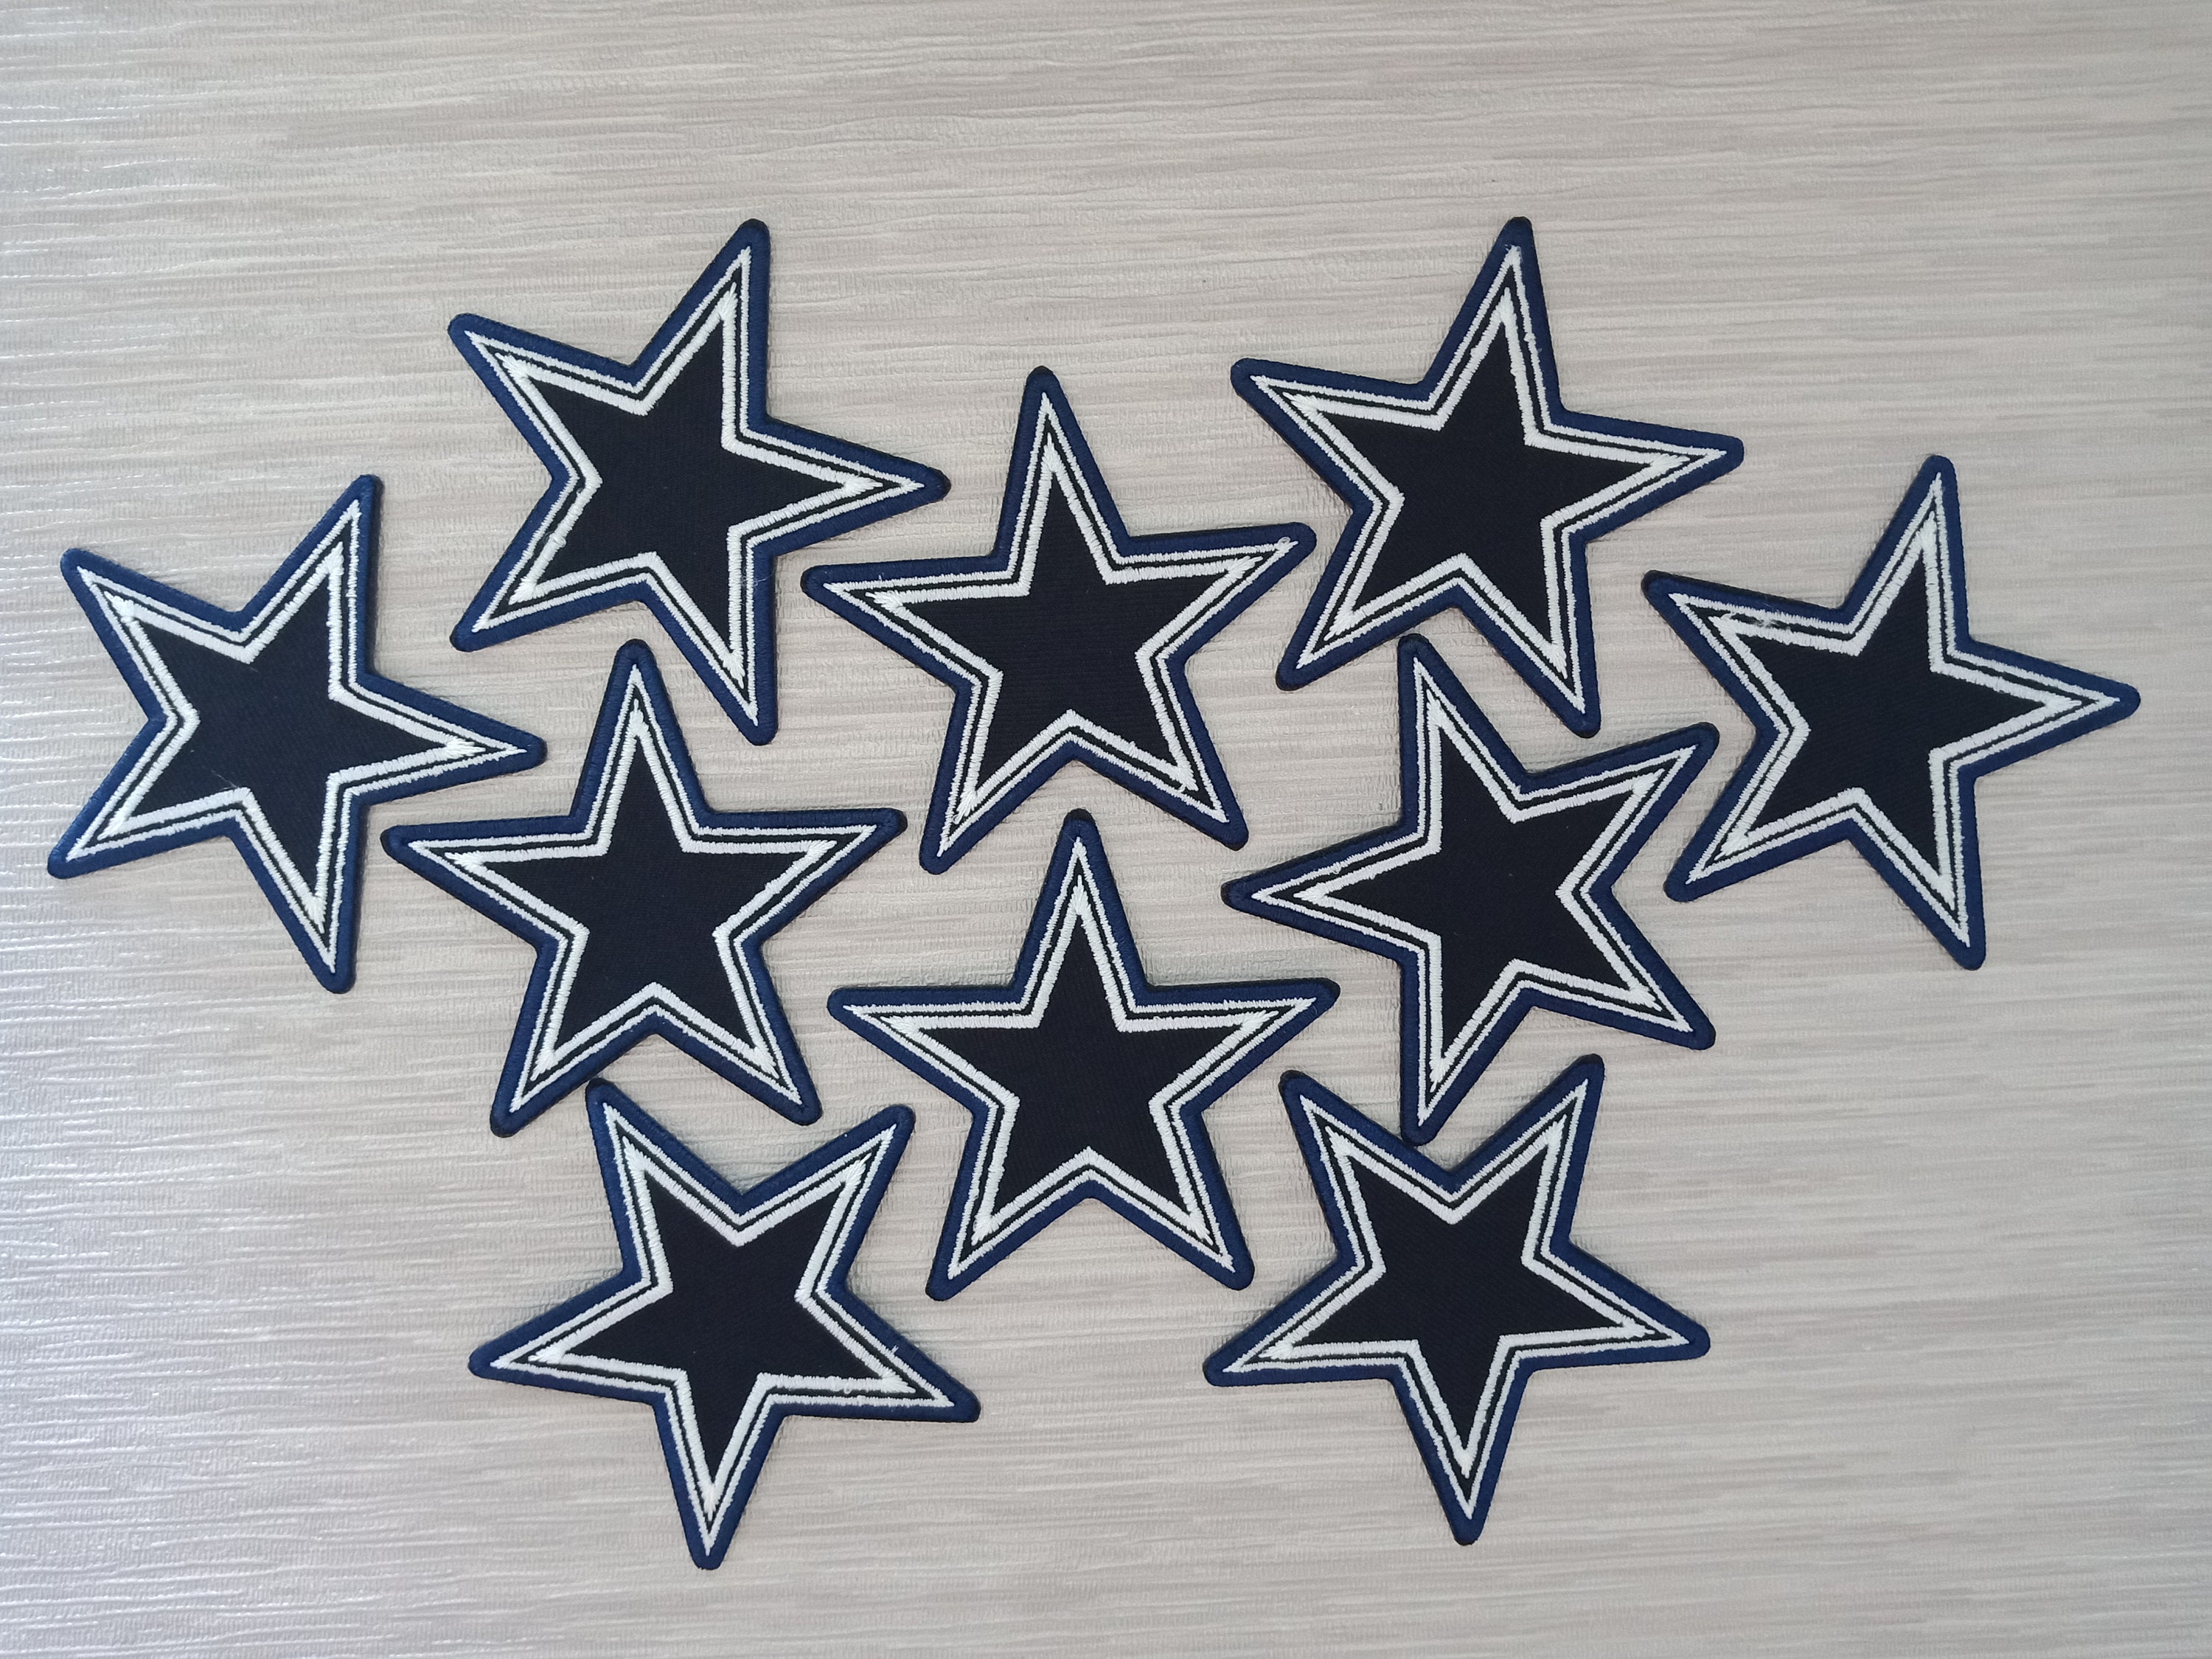 Dallas Cowboys Helmet Football Logo Embroidery Patch iron-on - Sewing